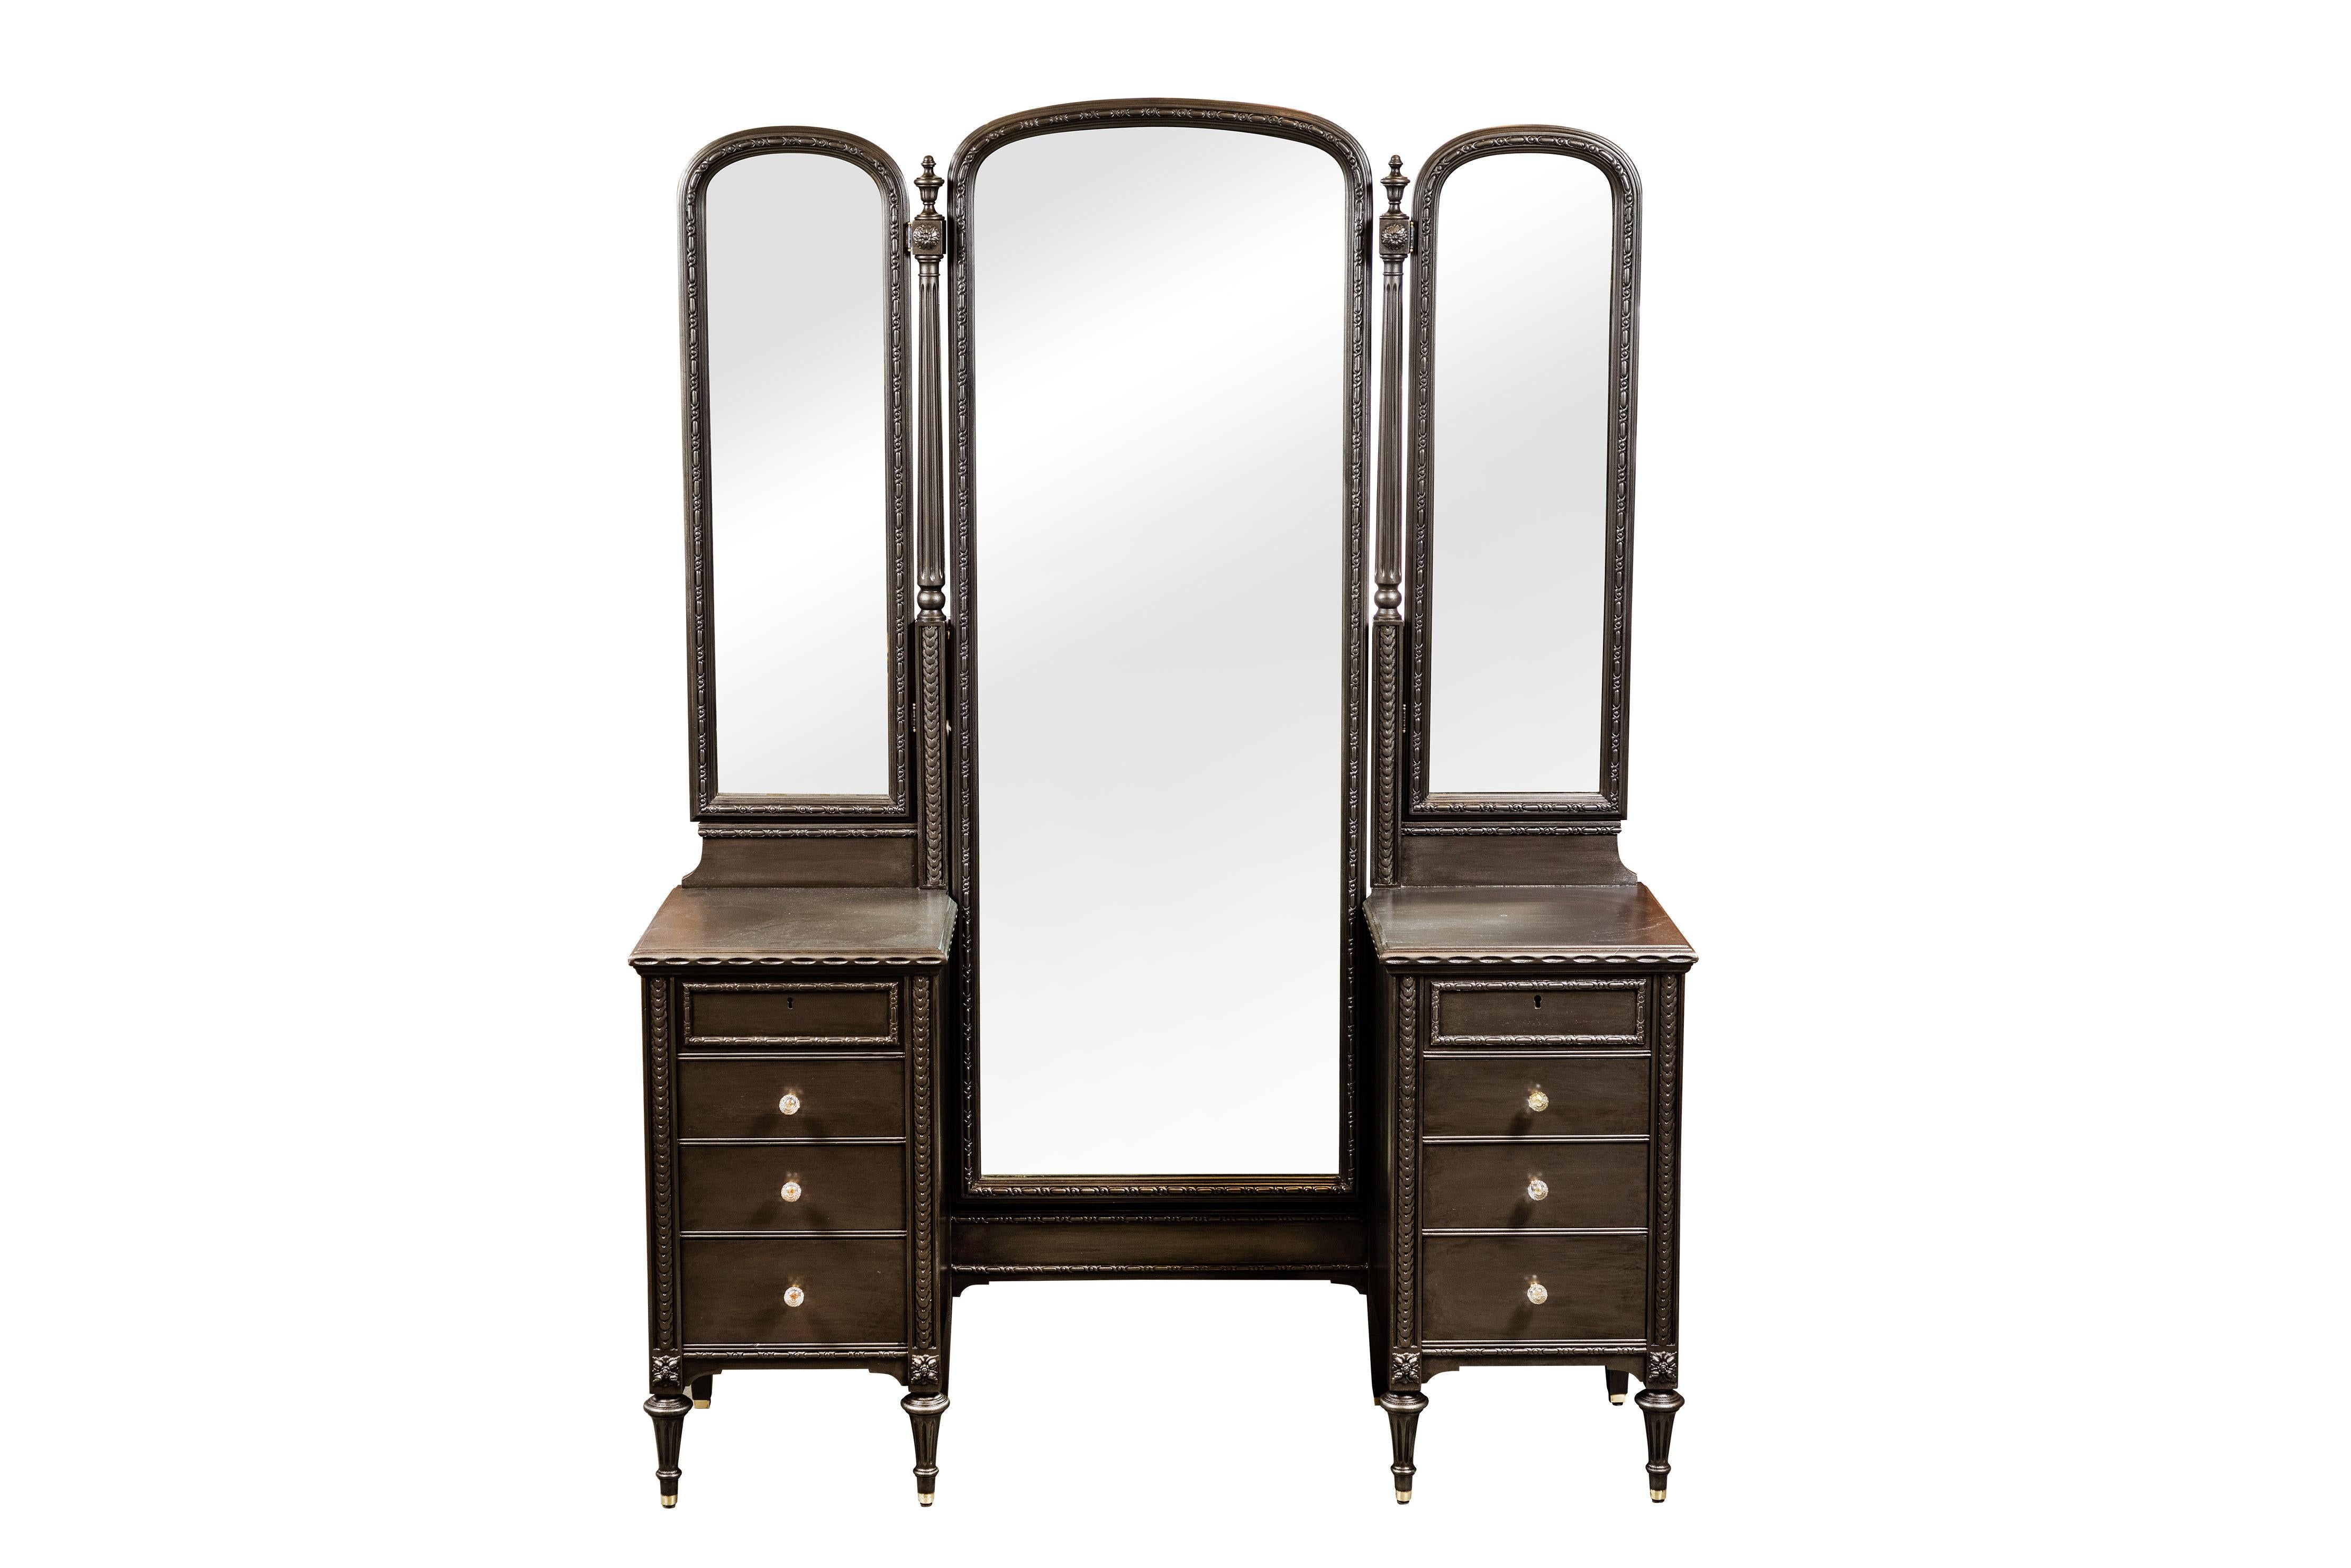 c. 1920's 3 mirror vanity.
Large center mirror tilts and 2 smaller side wing hinged mirrors can be adjusted.
Vanity has been newly painted in a metallic smoke finish and has vintage glass knobs on 6 of the 8 drawers and 2 top drawers lock with